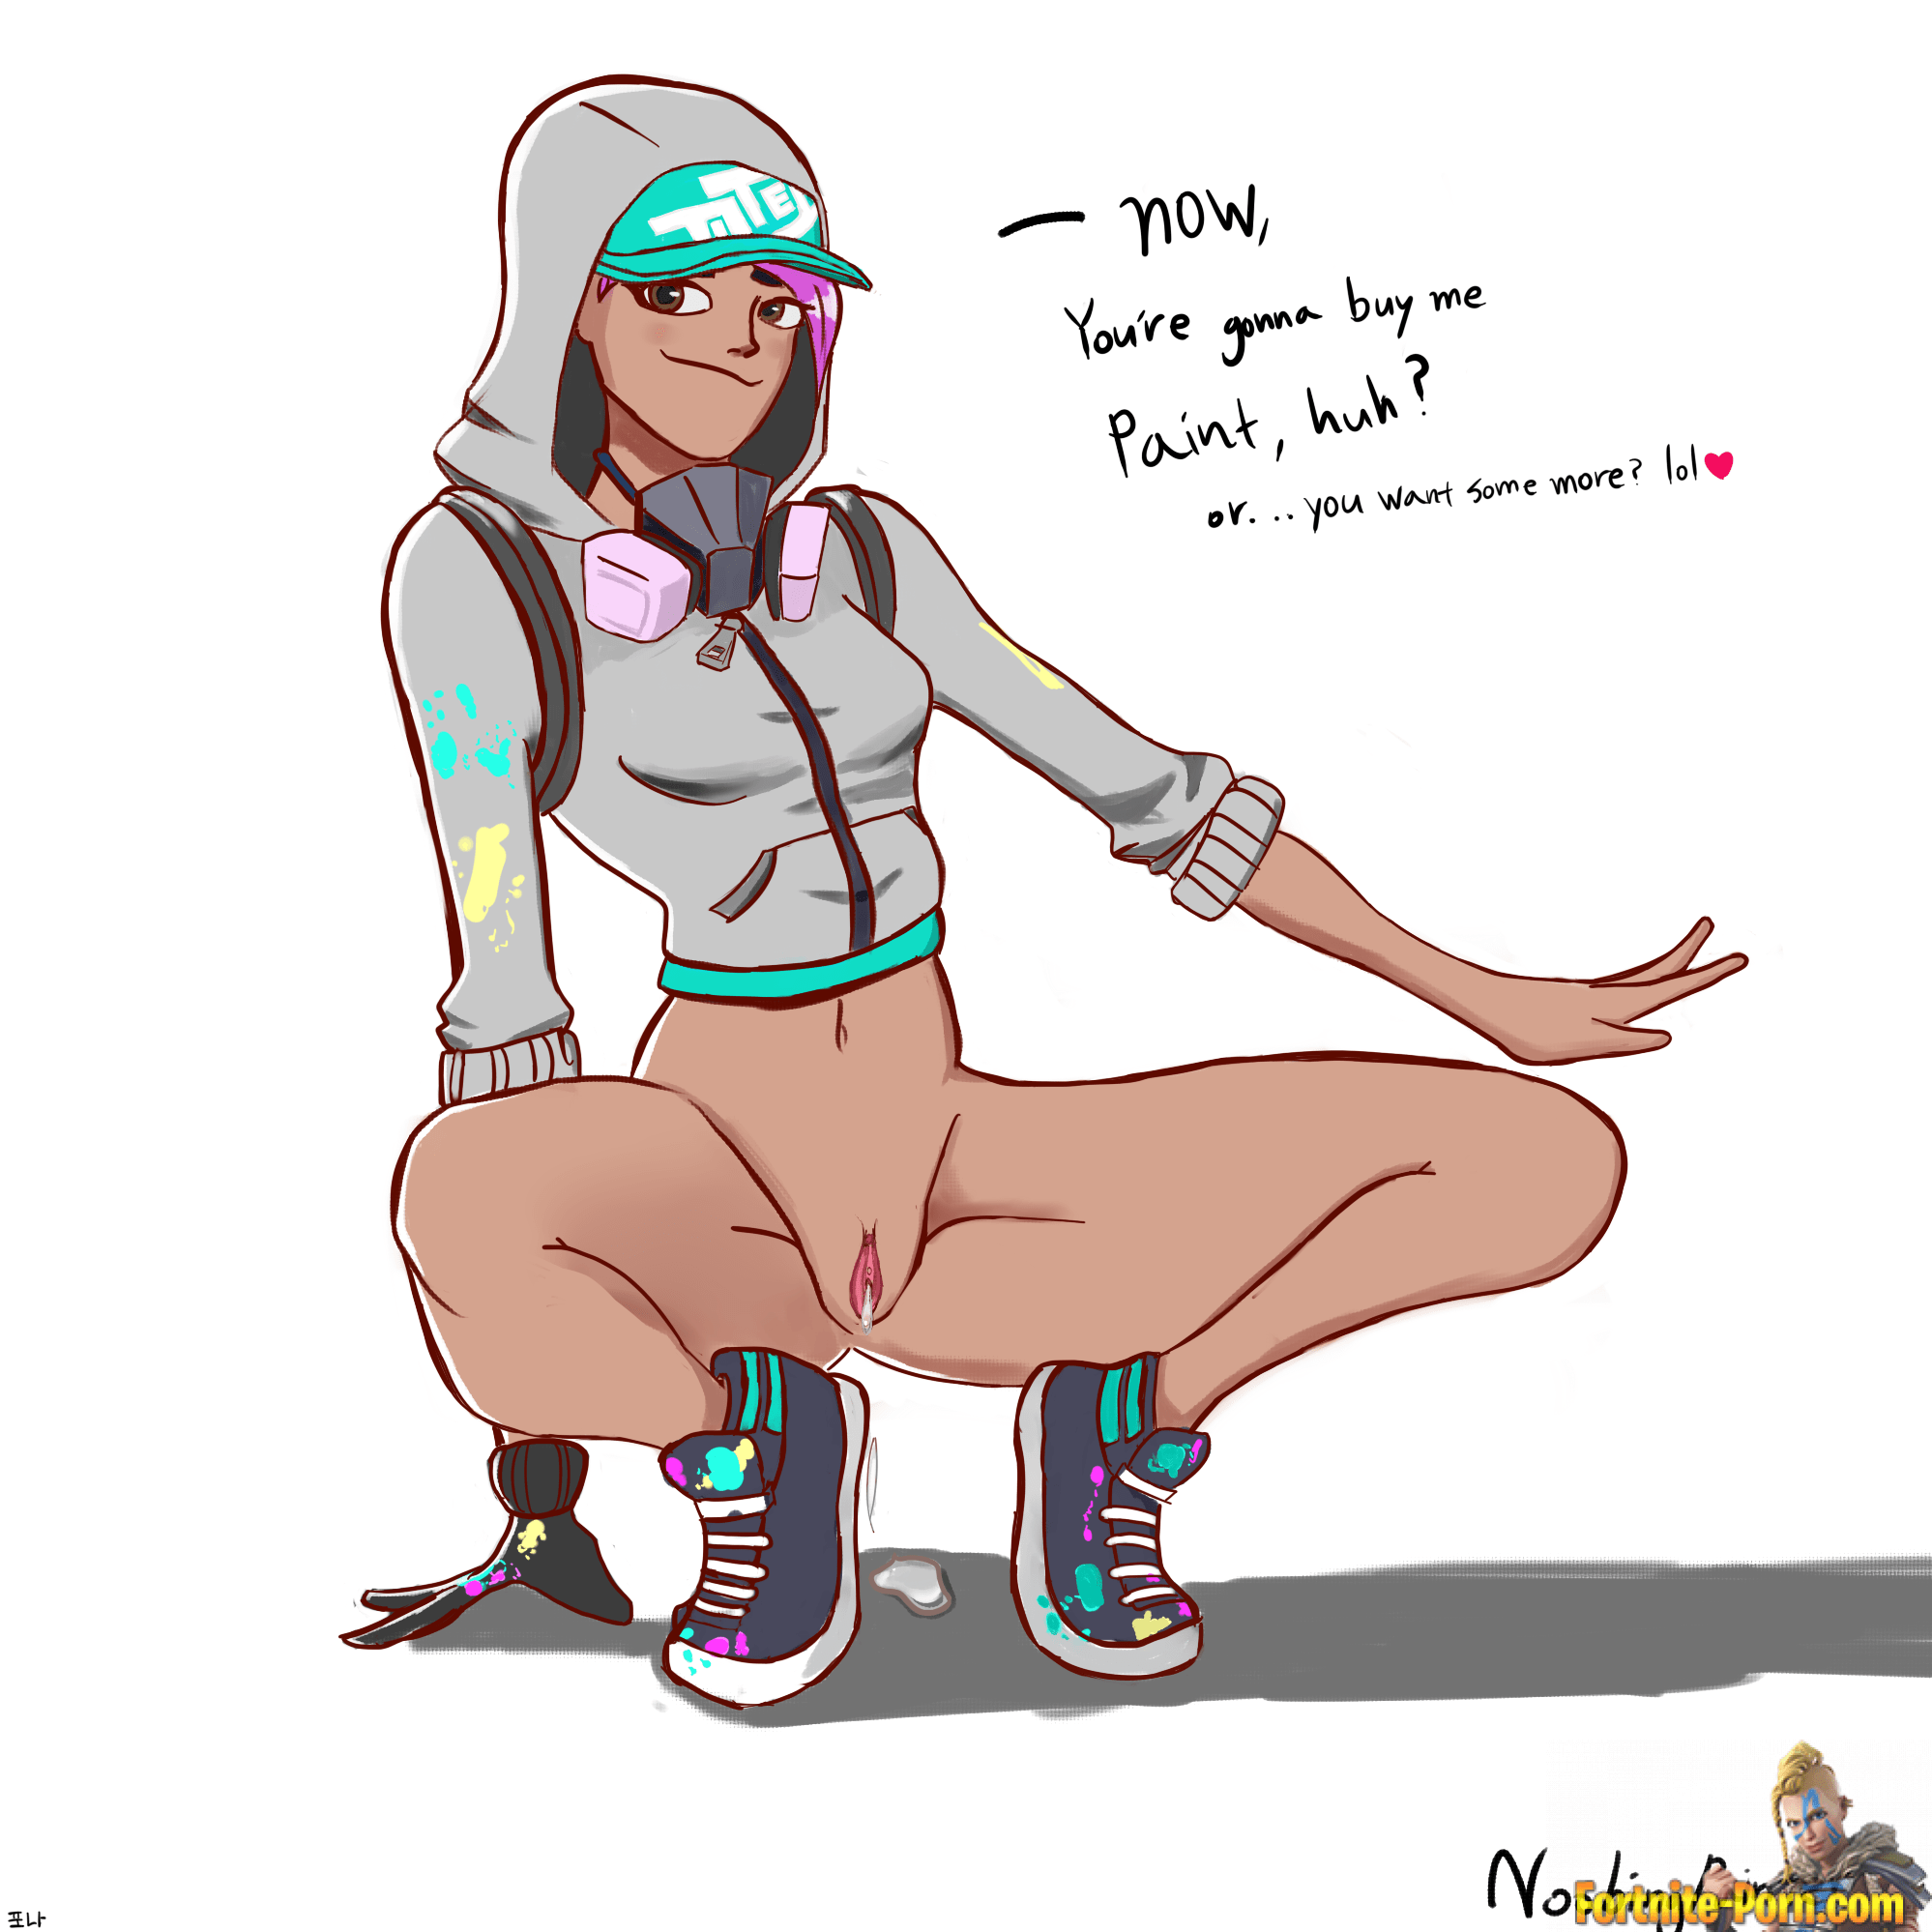 Teknique Wants Some More Of Your Cum * Fortnite Porn.